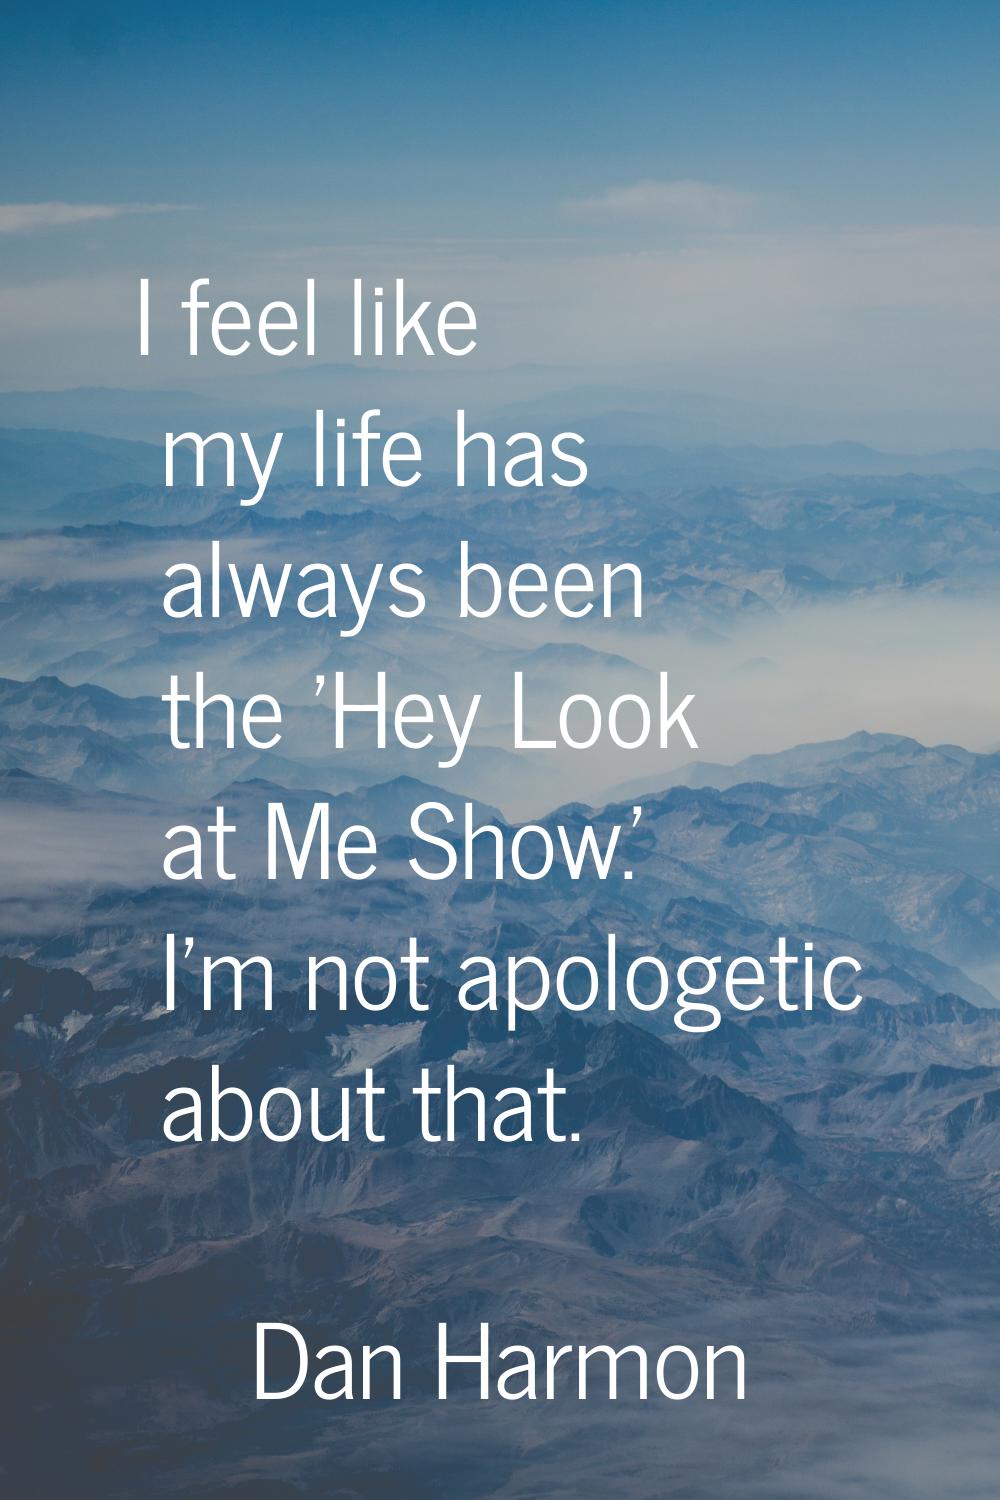 I feel like my life has always been the 'Hey Look at Me Show.' I'm not apologetic about that.